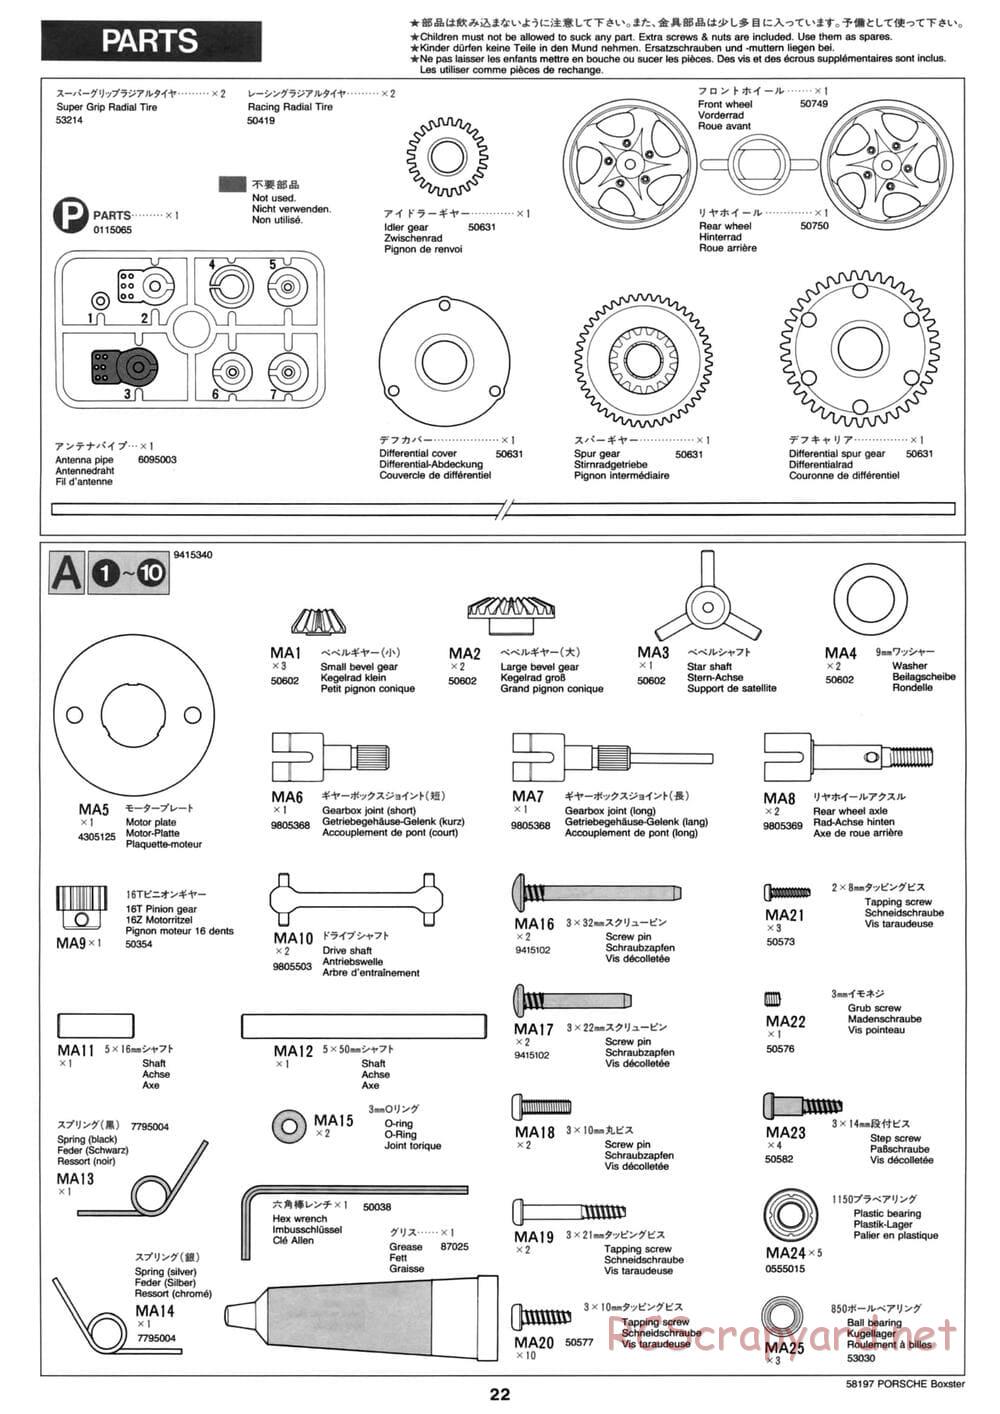 Tamiya - Porsche Boxster - M02L Chassis - Manual - Page 22